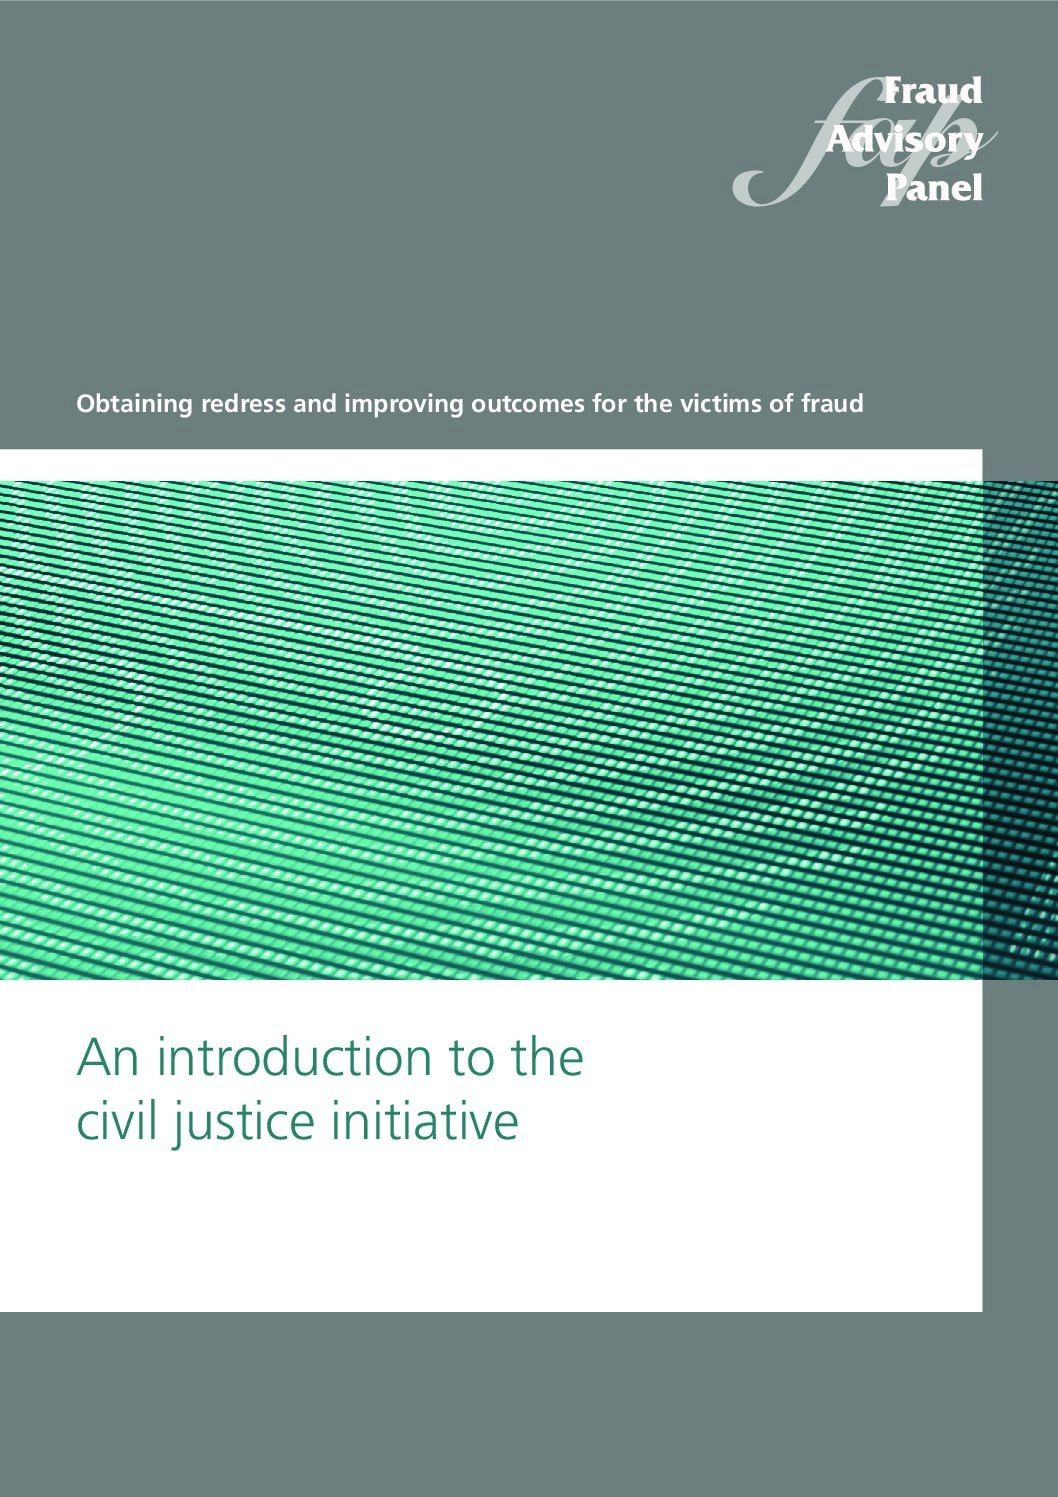 An introduction to criminal justice initiative 2012 document cover